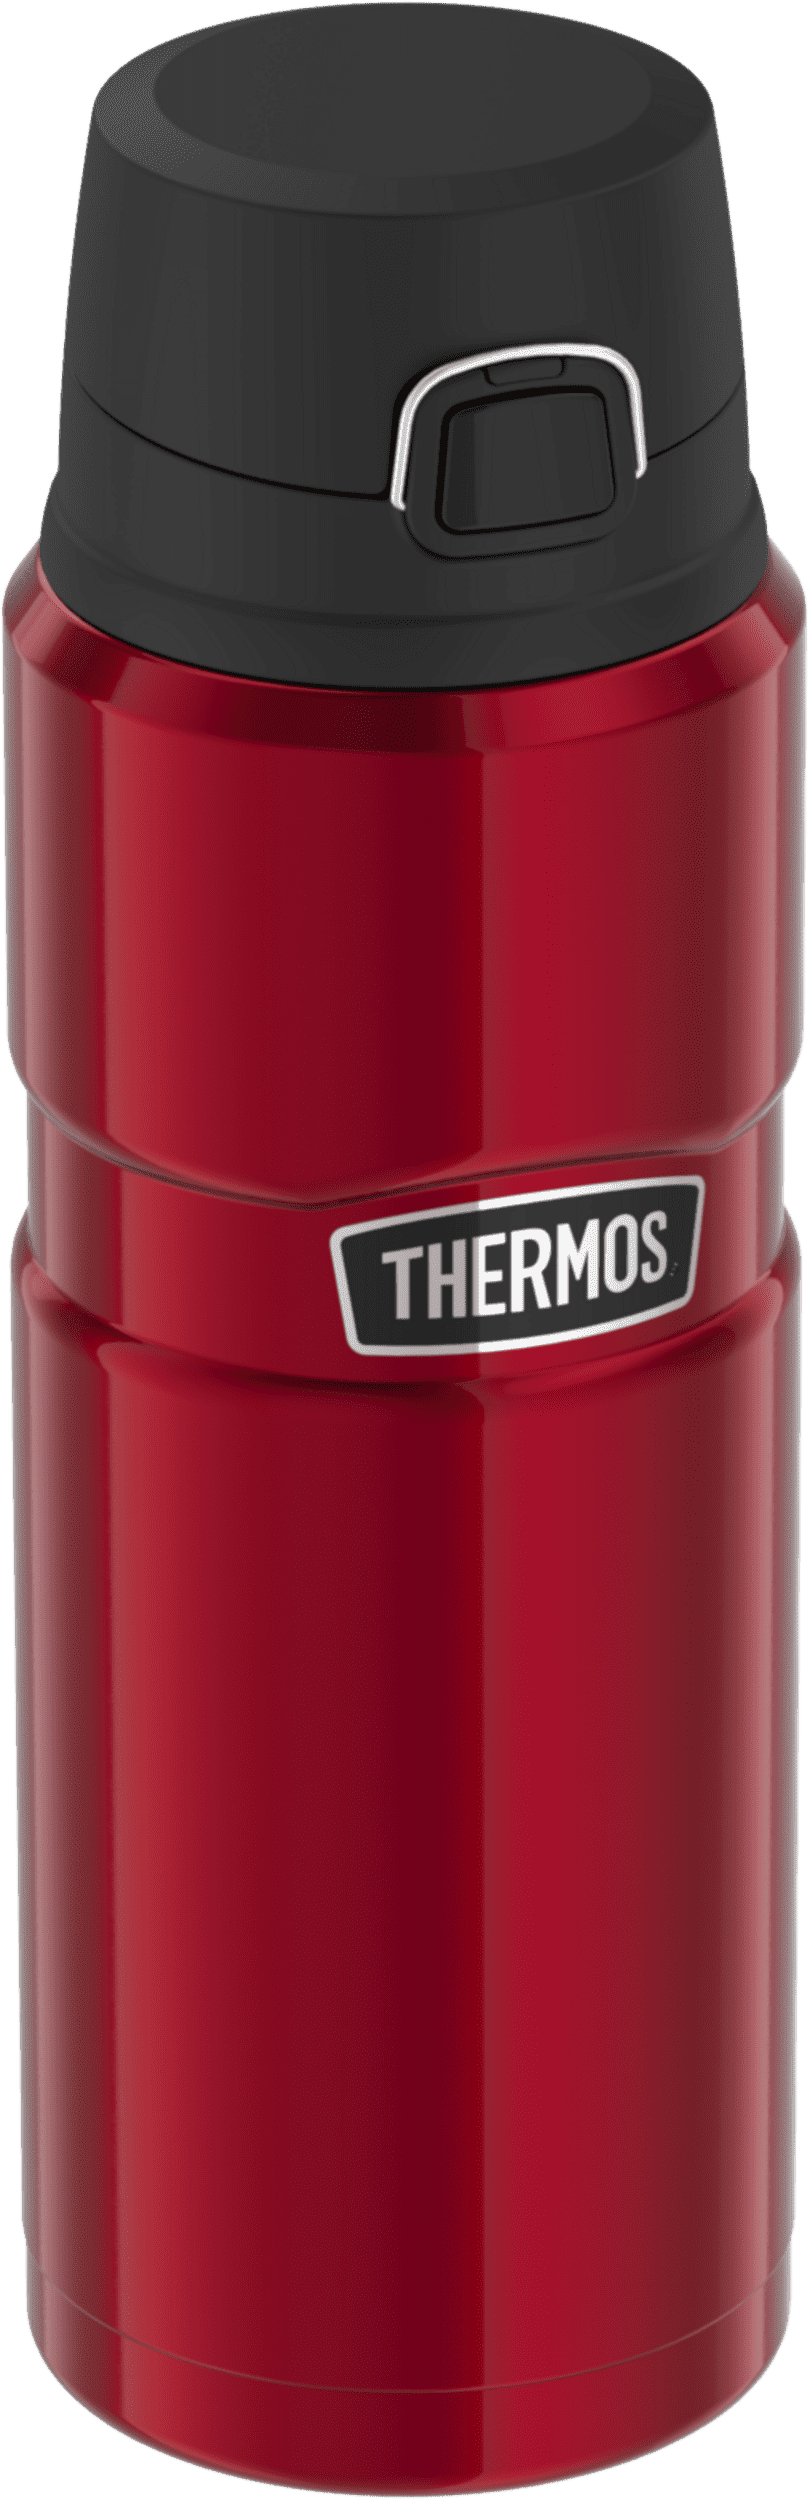 Thermos Isoliertrinkflasche Stainless King cranberry red 0,7l, oben